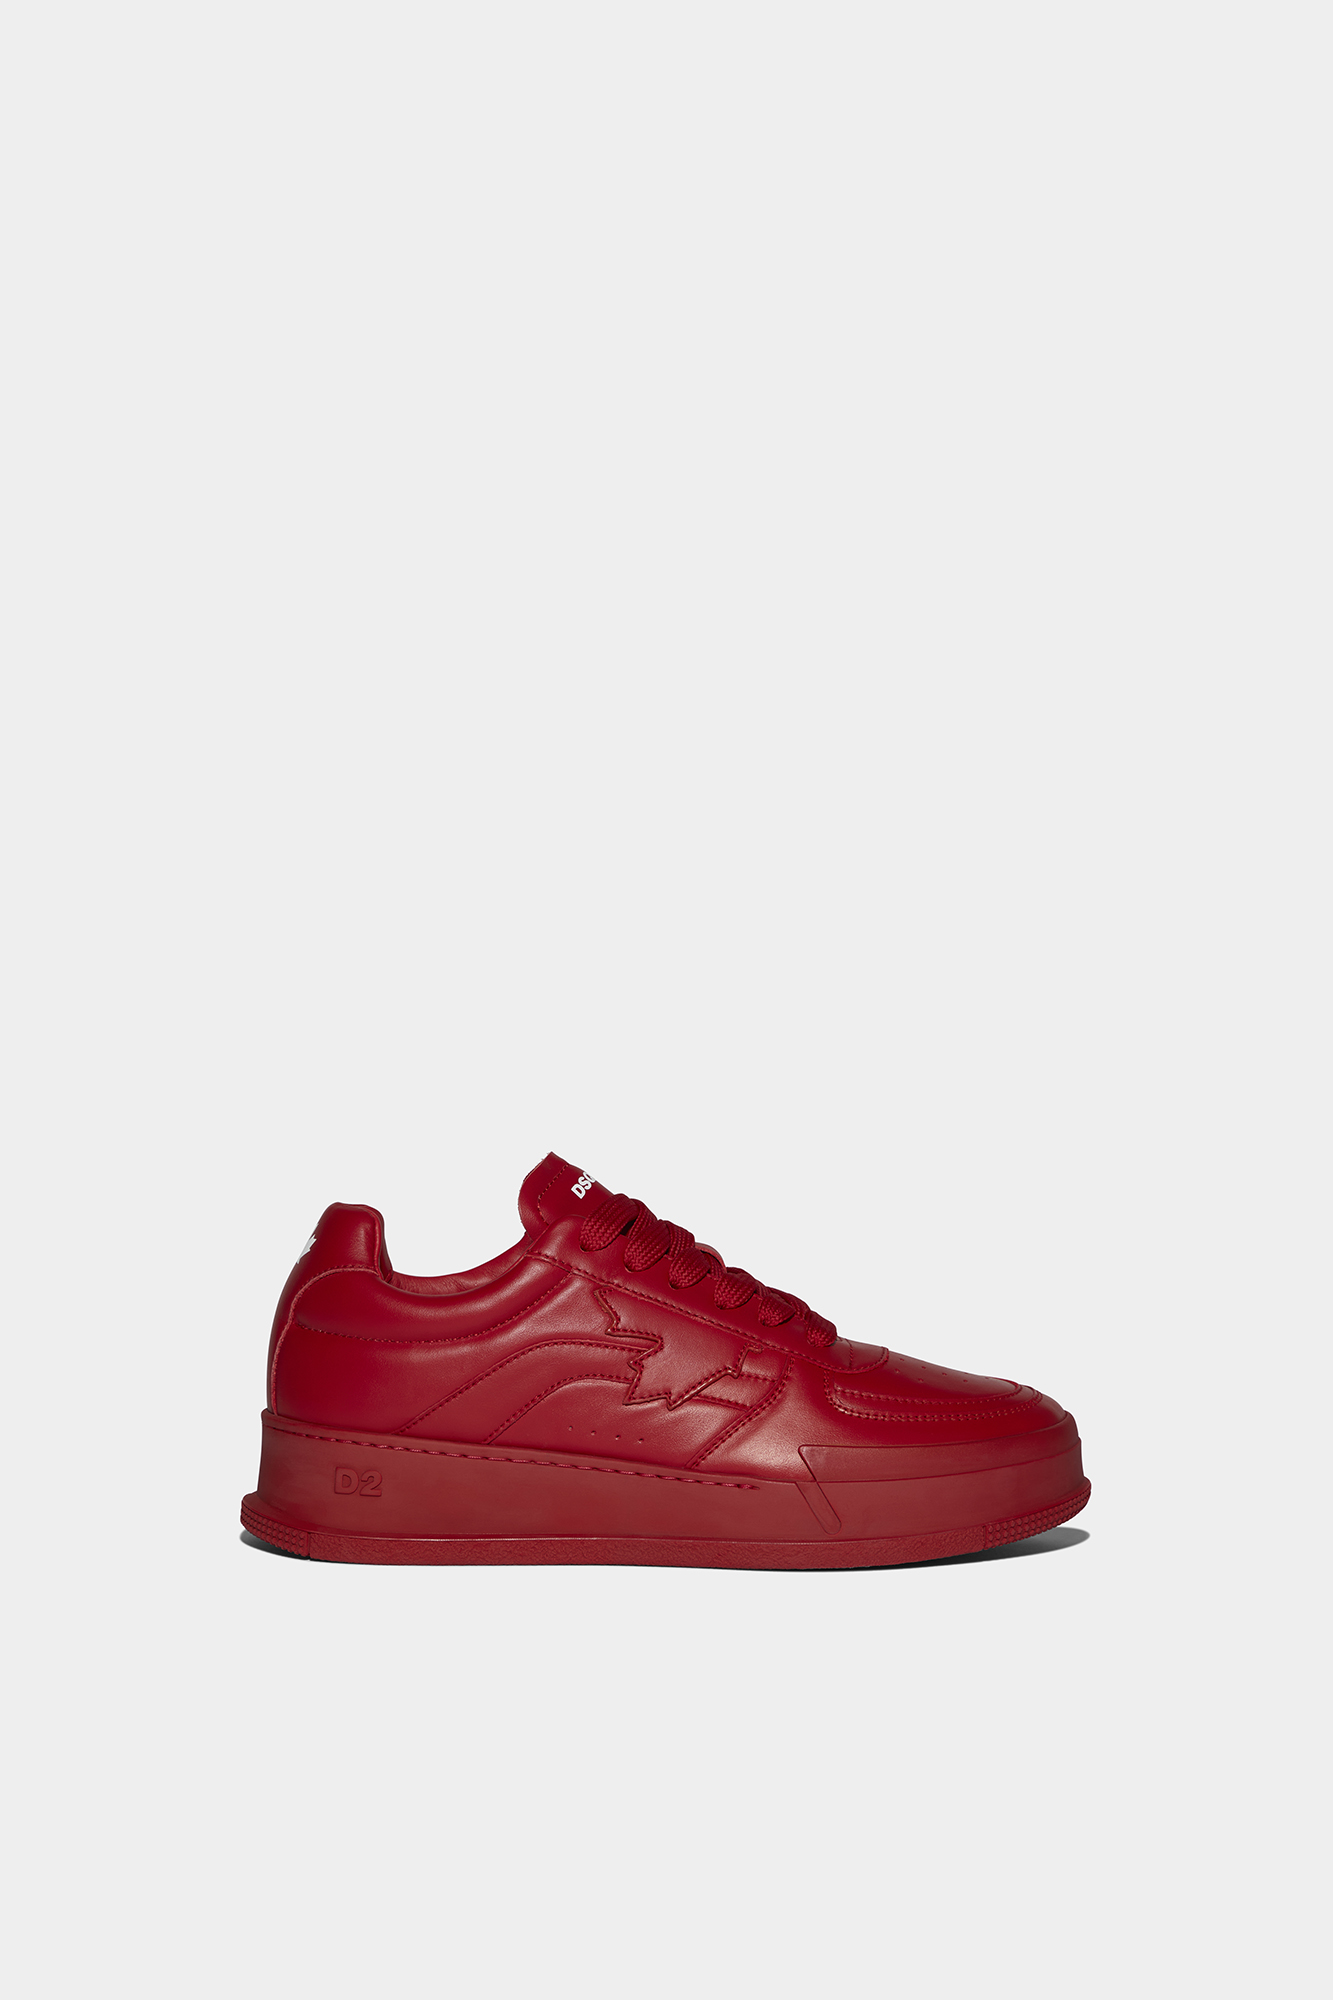 Canadian Sneakers In Red